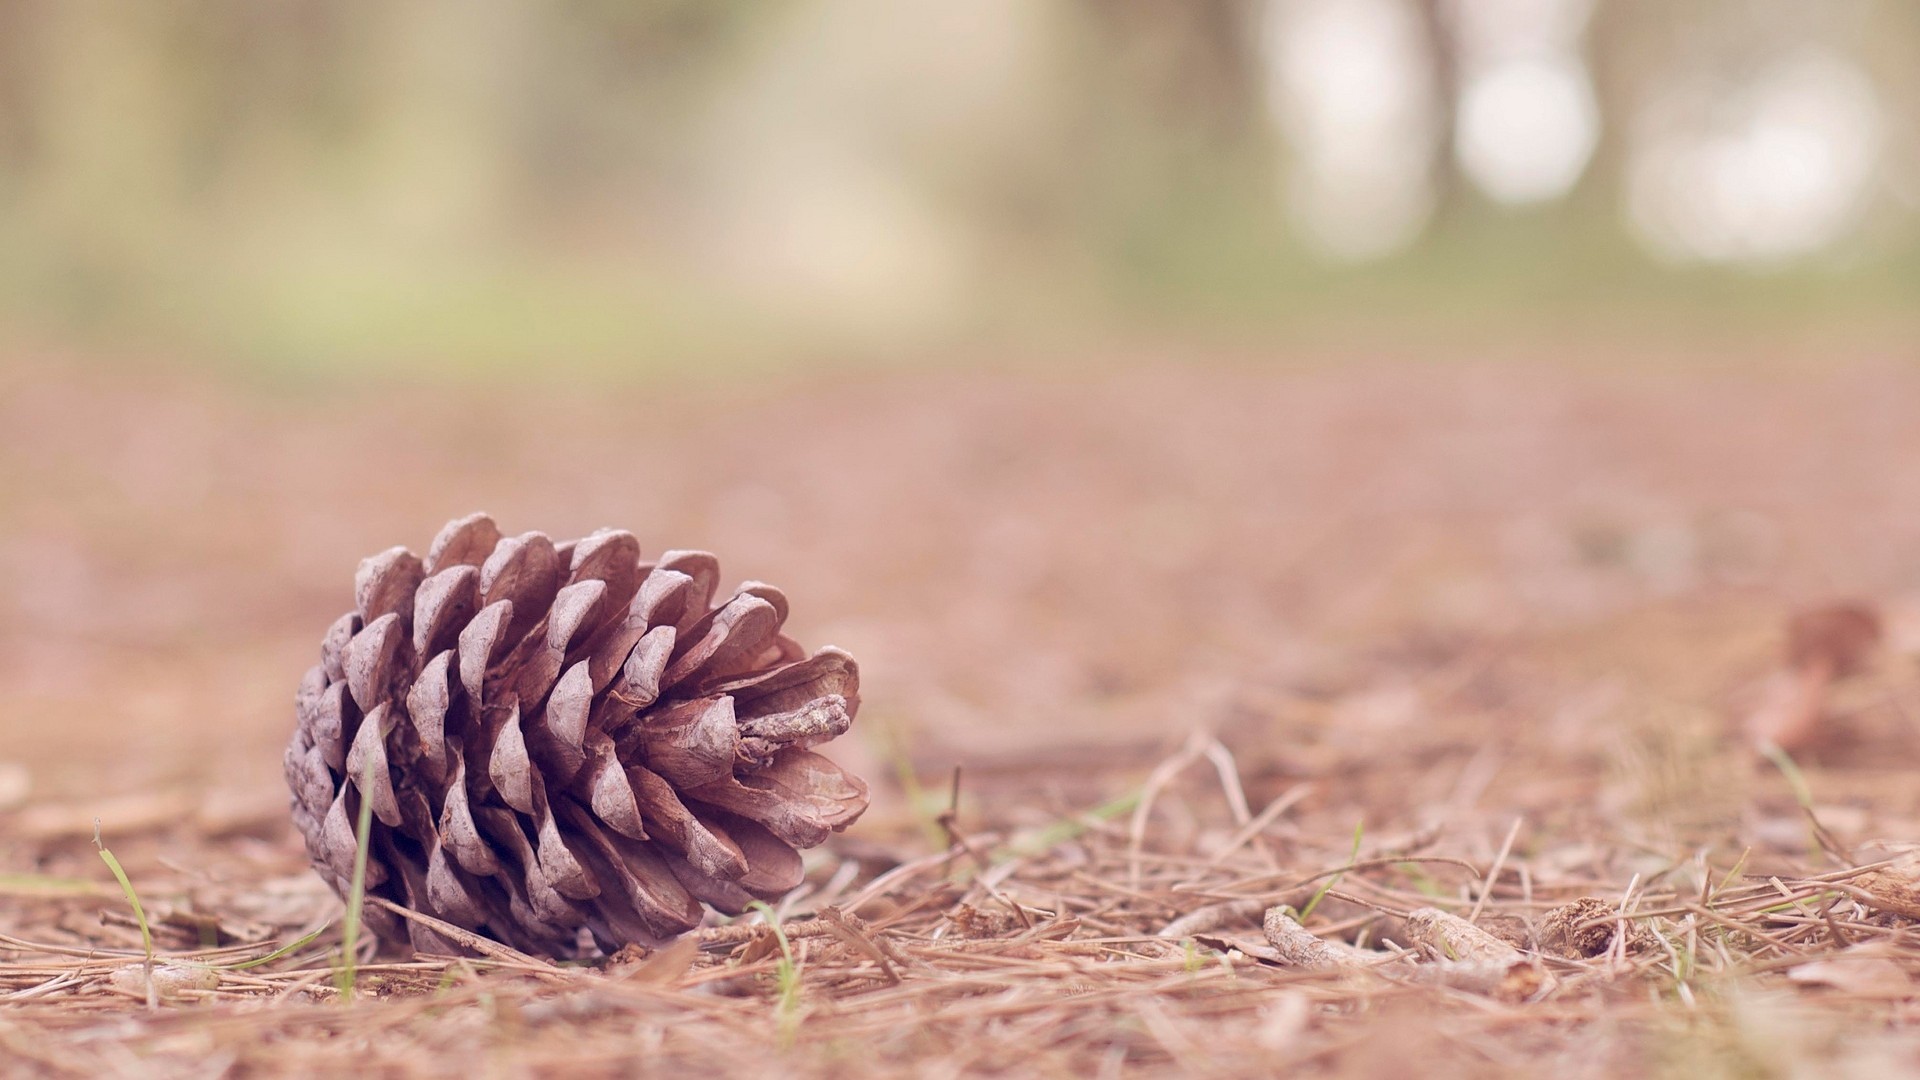 General 1920x1080 nature pine cones ground outdoors